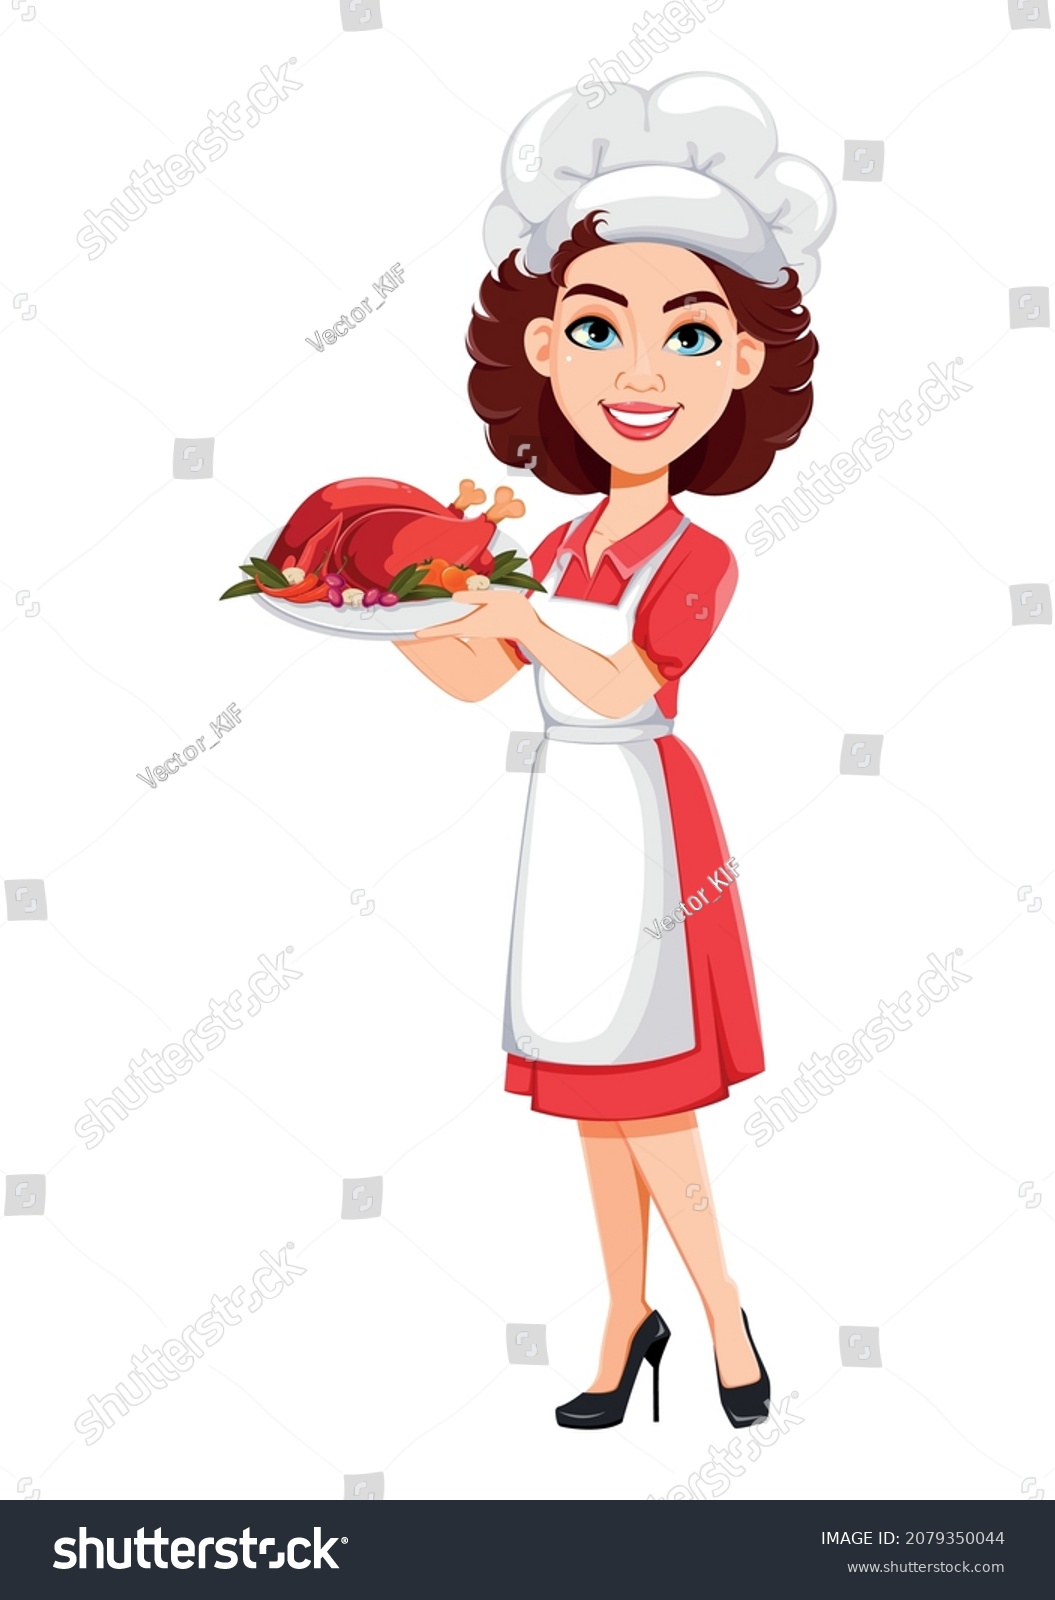 Chef Woman Holding Fried Turkey Cook Stock Vector (Royalty Free ...